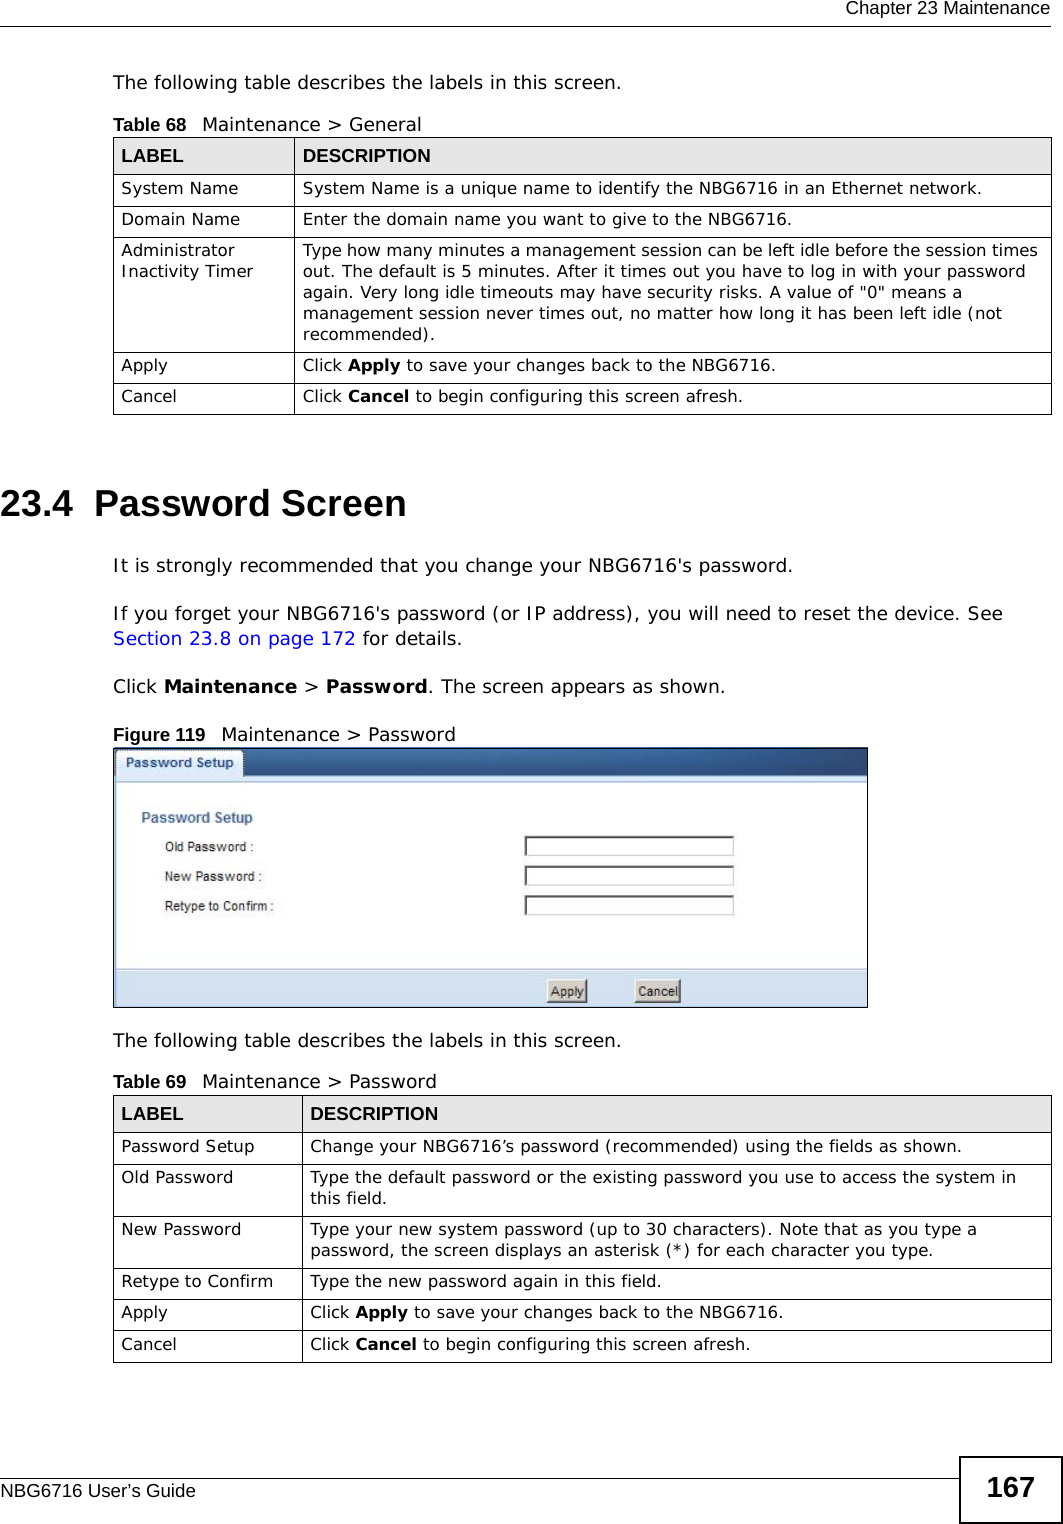  Chapter 23 MaintenanceNBG6716 User’s Guide 167The following table describes the labels in this screen.23.4  Password ScreenIt is strongly recommended that you change your NBG6716&apos;s password. If you forget your NBG6716&apos;s password (or IP address), you will need to reset the device. See Section 23.8 on page 172 for details.Click Maintenance &gt; Password. The screen appears as shown.Figure 119   Maintenance &gt; Password The following table describes the labels in this screen.Table 68   Maintenance &gt; GeneralLABEL DESCRIPTIONSystem Name System Name is a unique name to identify the NBG6716 in an Ethernet network.Domain Name Enter the domain name you want to give to the NBG6716.Administrator Inactivity Timer Type how many minutes a management session can be left idle before the session times out. The default is 5 minutes. After it times out you have to log in with your password again. Very long idle timeouts may have security risks. A value of &quot;0&quot; means a management session never times out, no matter how long it has been left idle (not recommended).Apply Click Apply to save your changes back to the NBG6716.Cancel Click Cancel to begin configuring this screen afresh.Table 69   Maintenance &gt; PasswordLABEL DESCRIPTIONPassword Setup Change your NBG6716’s password (recommended) using the fields as shown.Old Password Type the default password or the existing password you use to access the system in this field.New Password Type your new system password (up to 30 characters). Note that as you type a password, the screen displays an asterisk (*) for each character you type.Retype to Confirm Type the new password again in this field.Apply Click Apply to save your changes back to the NBG6716.Cancel Click Cancel to begin configuring this screen afresh.